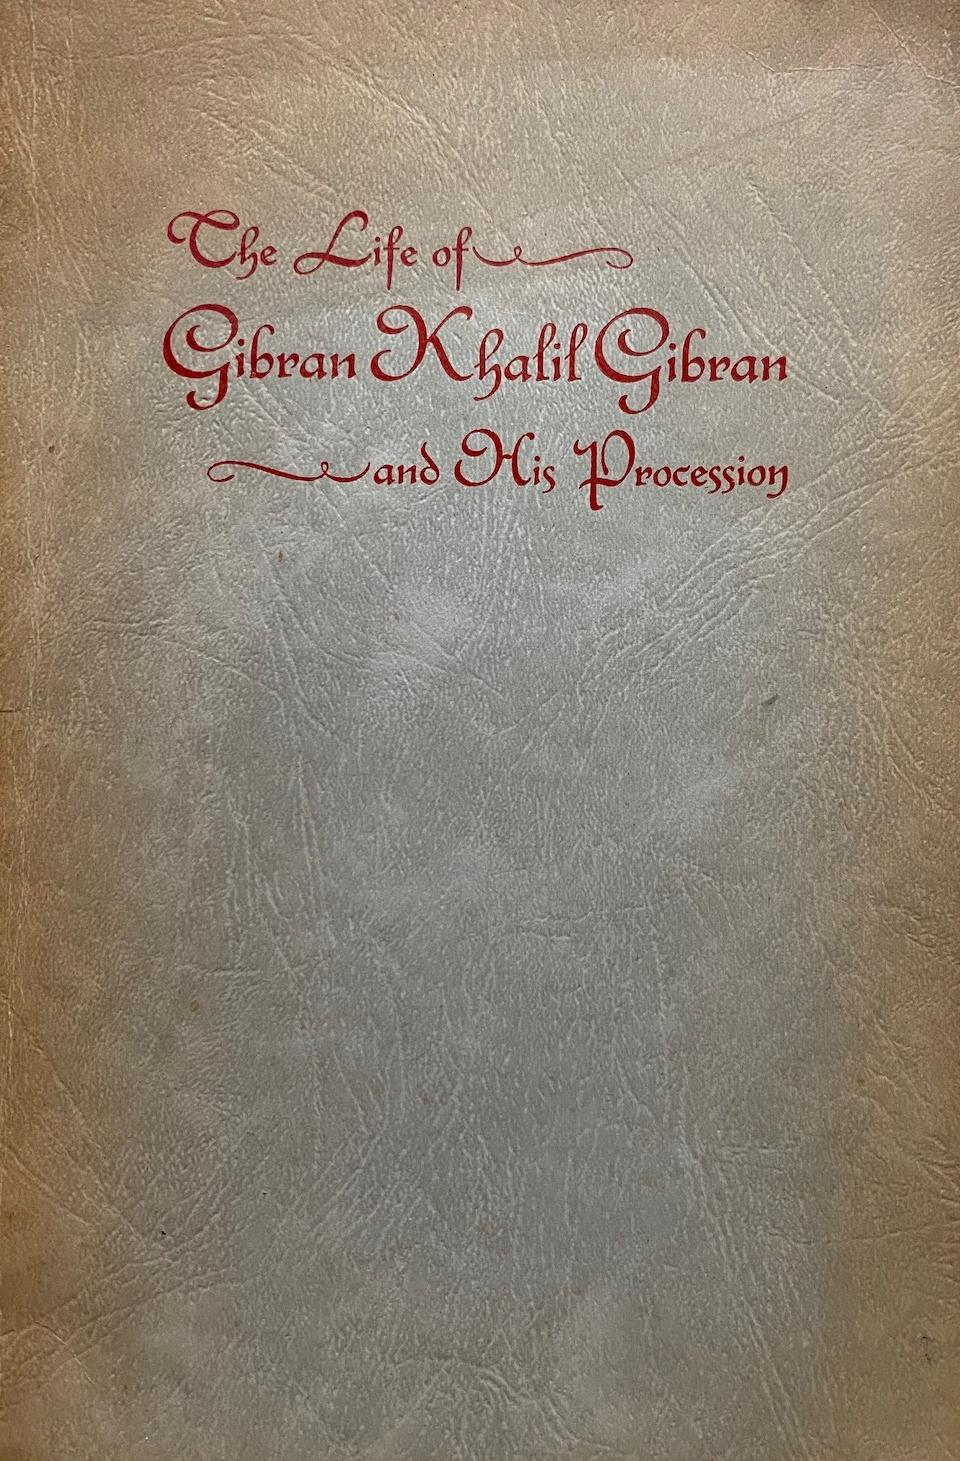 The Life of Gibran Khalil Gibran and His Procession, George Kheirallah, 1947